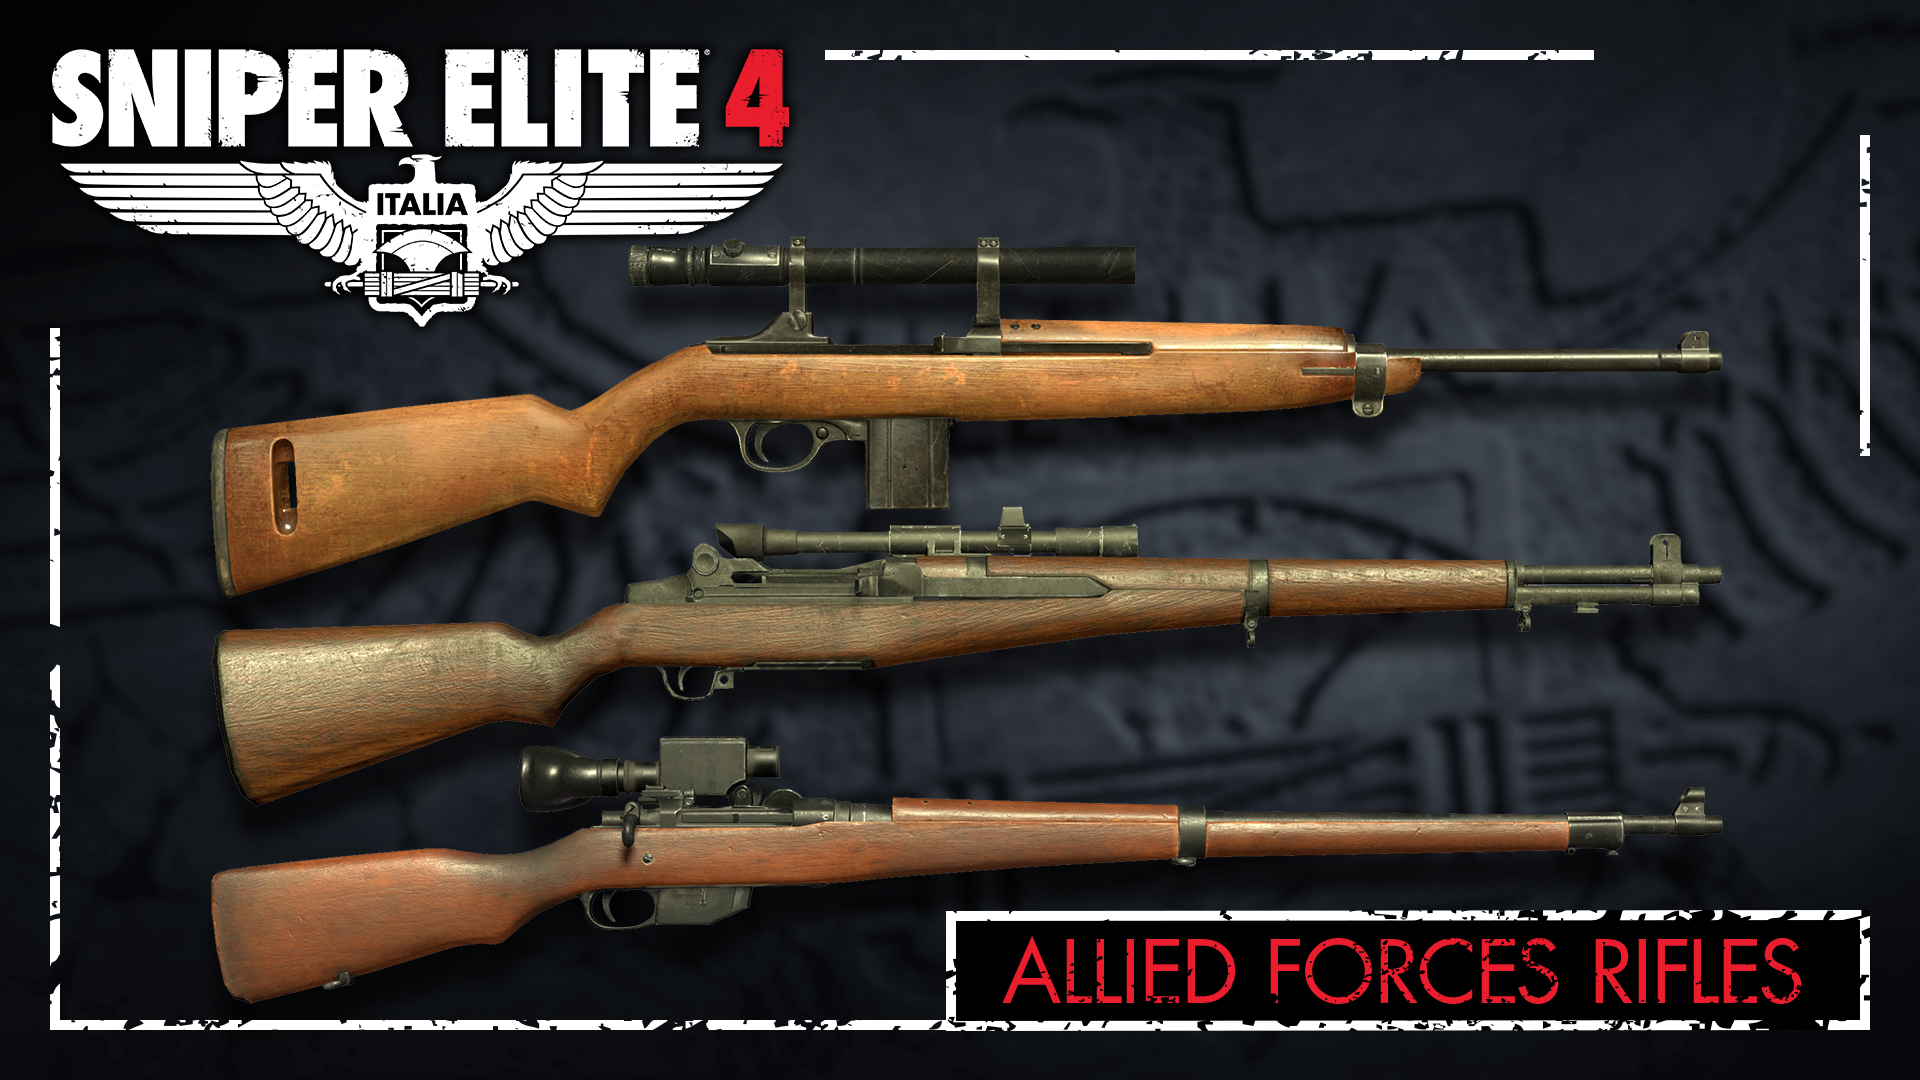 Sniper Elite 4 - Allied Forces Rifle Pack DLC Steam CD Key USD 4.51